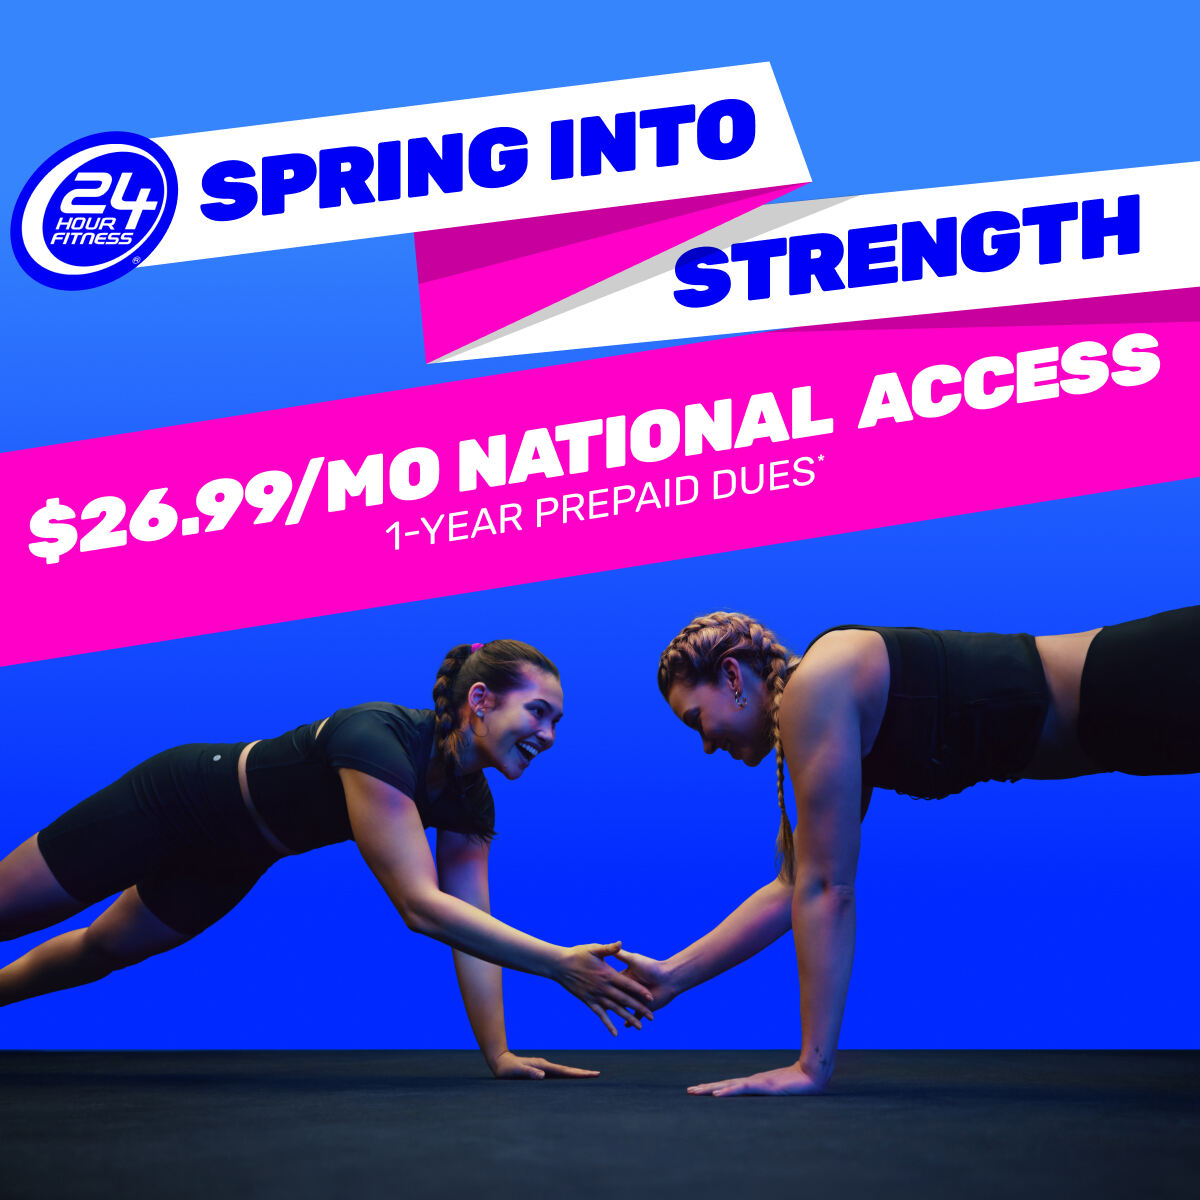 24hourfitness | National access | $26.99 a month + $54 annual fee